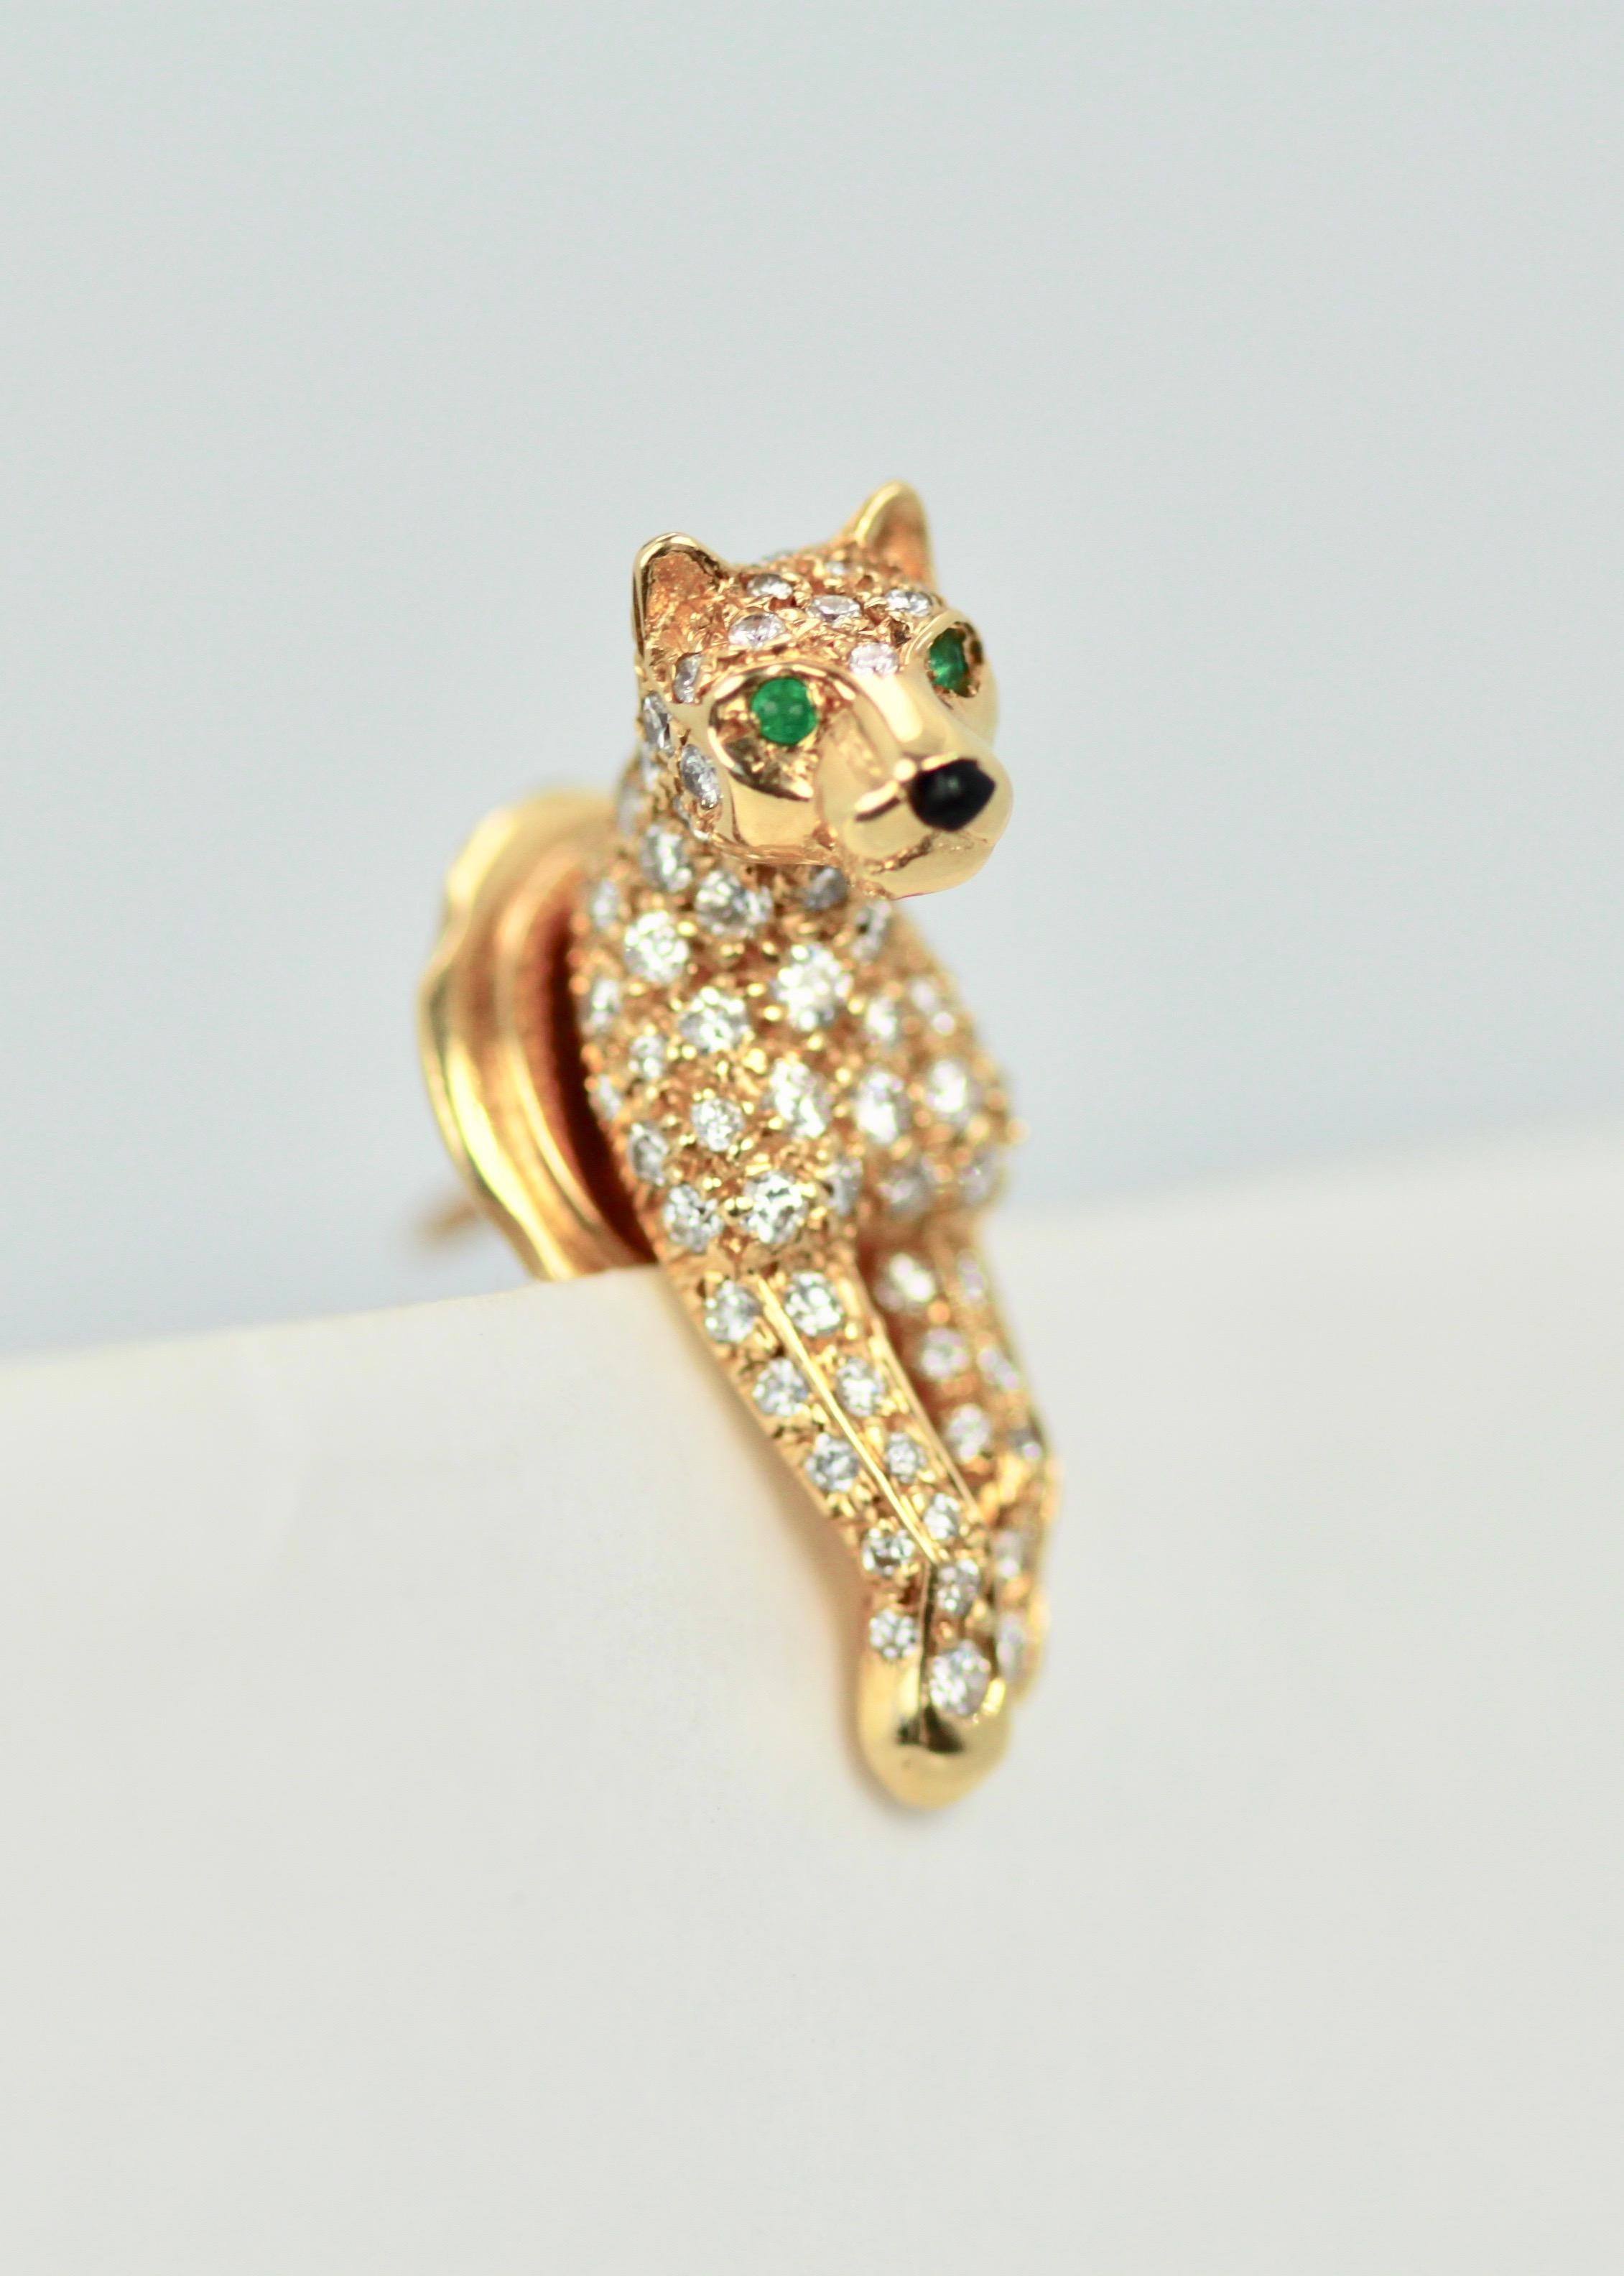 This Cartier Diamond Panthere Lapel Pin has been discontinued.  This iconic Panthere was made in 1992 with 0.9 carats of Brilliant cut Diamonds, Onyx nose, 2 Faceted Emerald Eyes (light Emerald) looks like Peridot but it is not they are Emeralds and